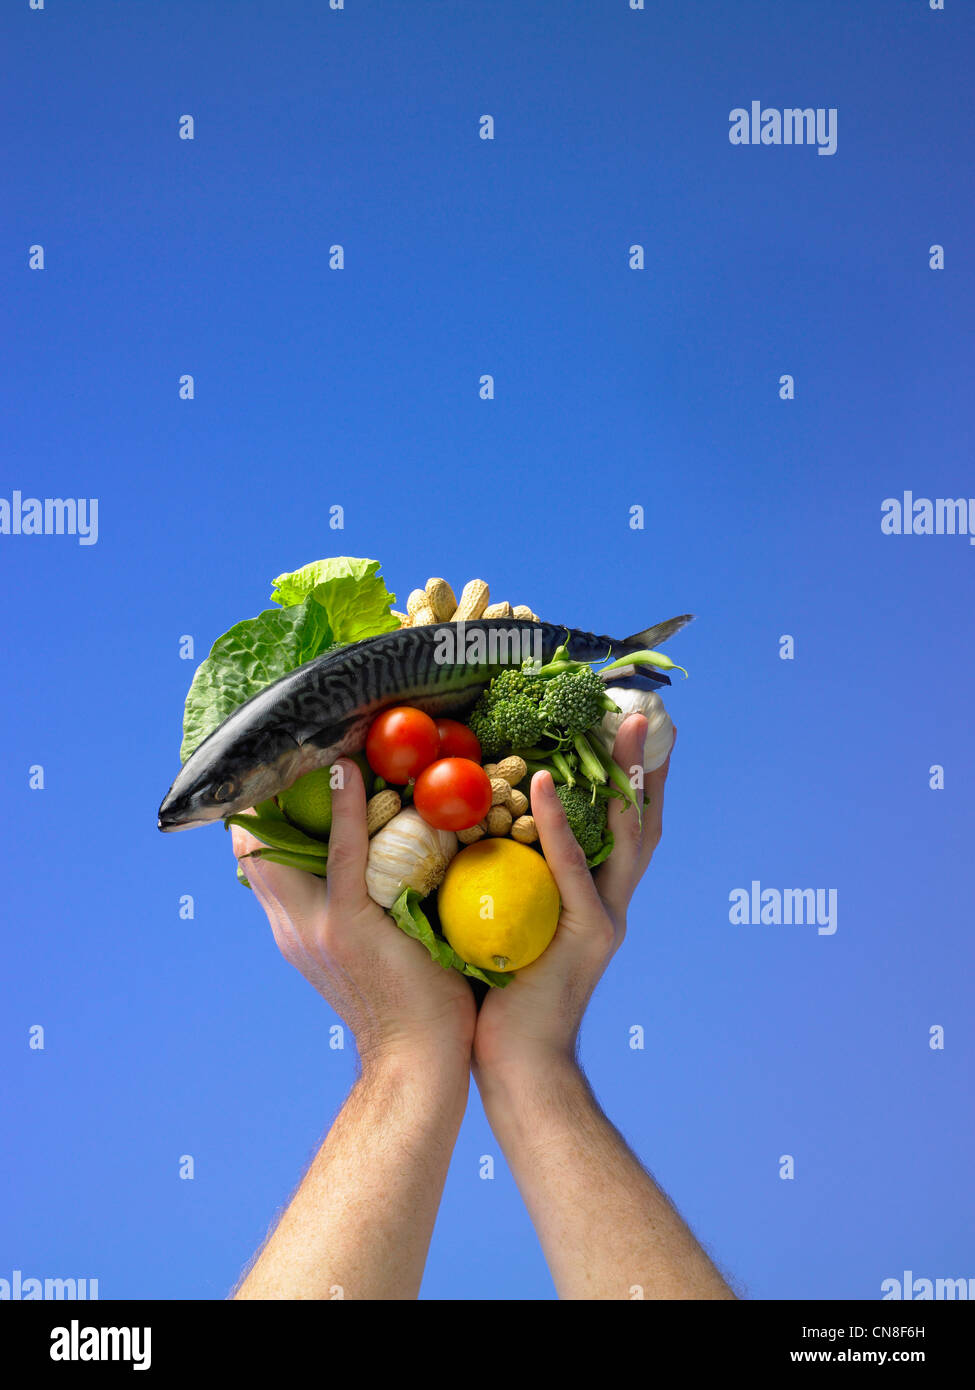 Hands holding up healthy foods Stock Photo